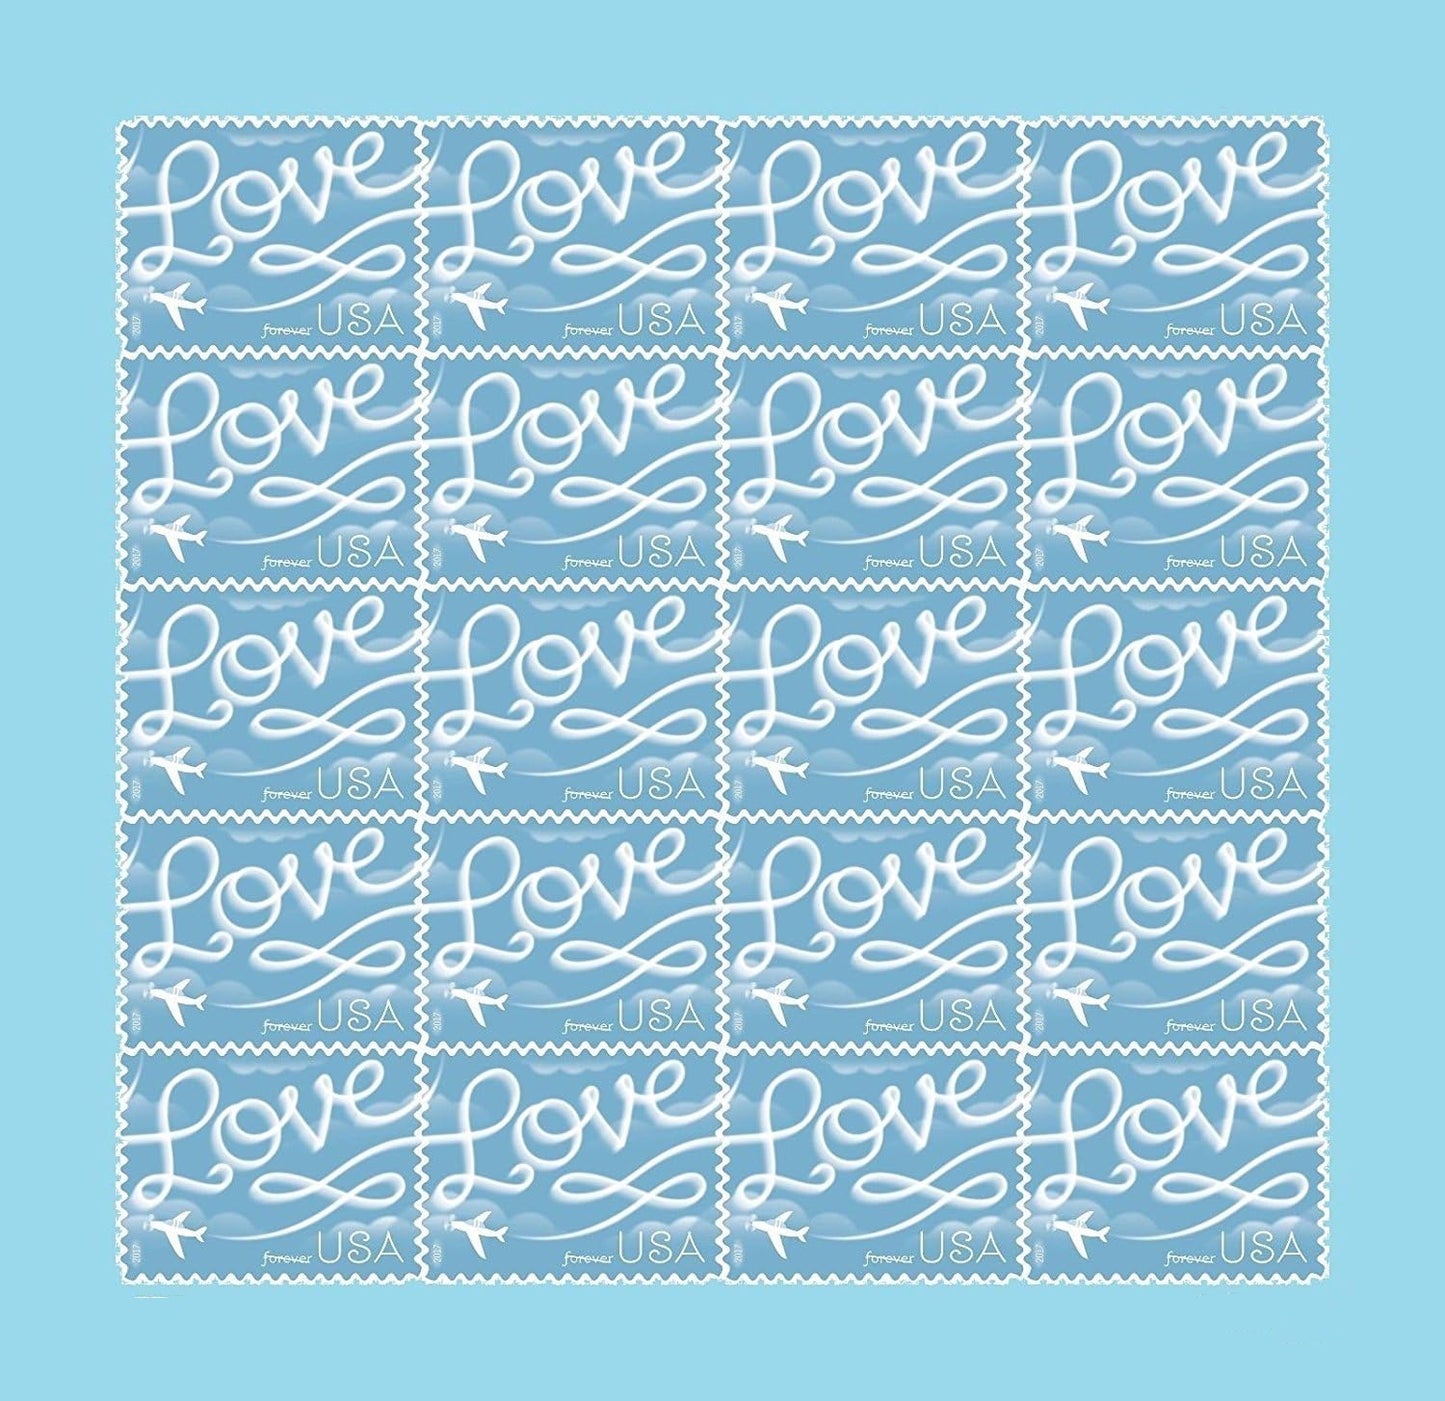 2017 Love Skywriting Wedding Forever Stamps